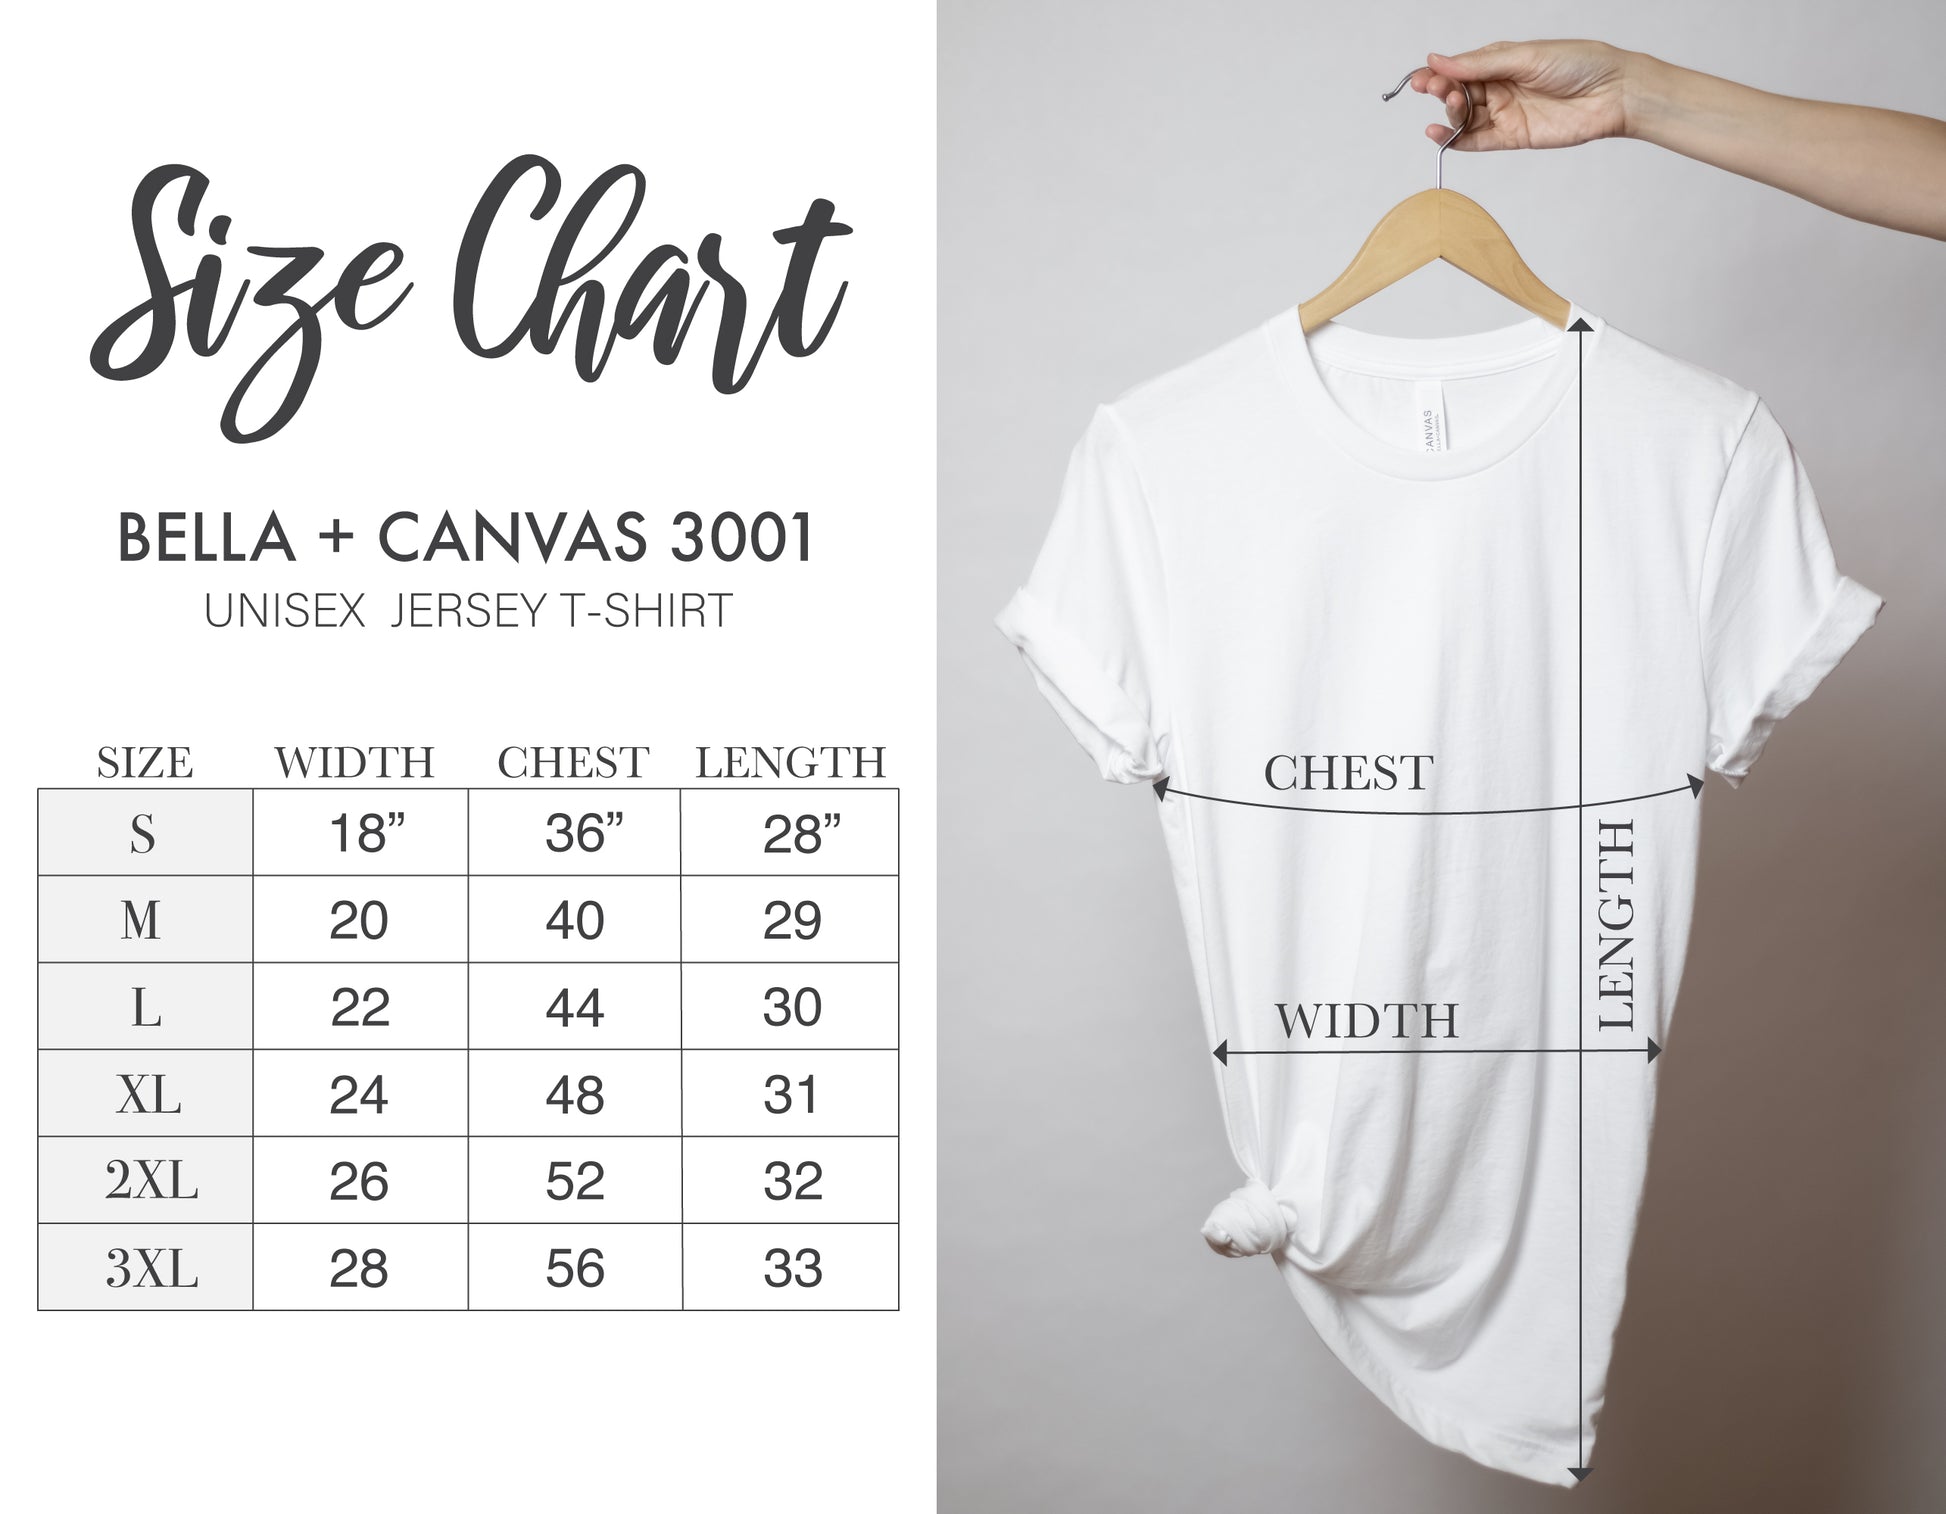 Size Chart Bella and Canvas 3001